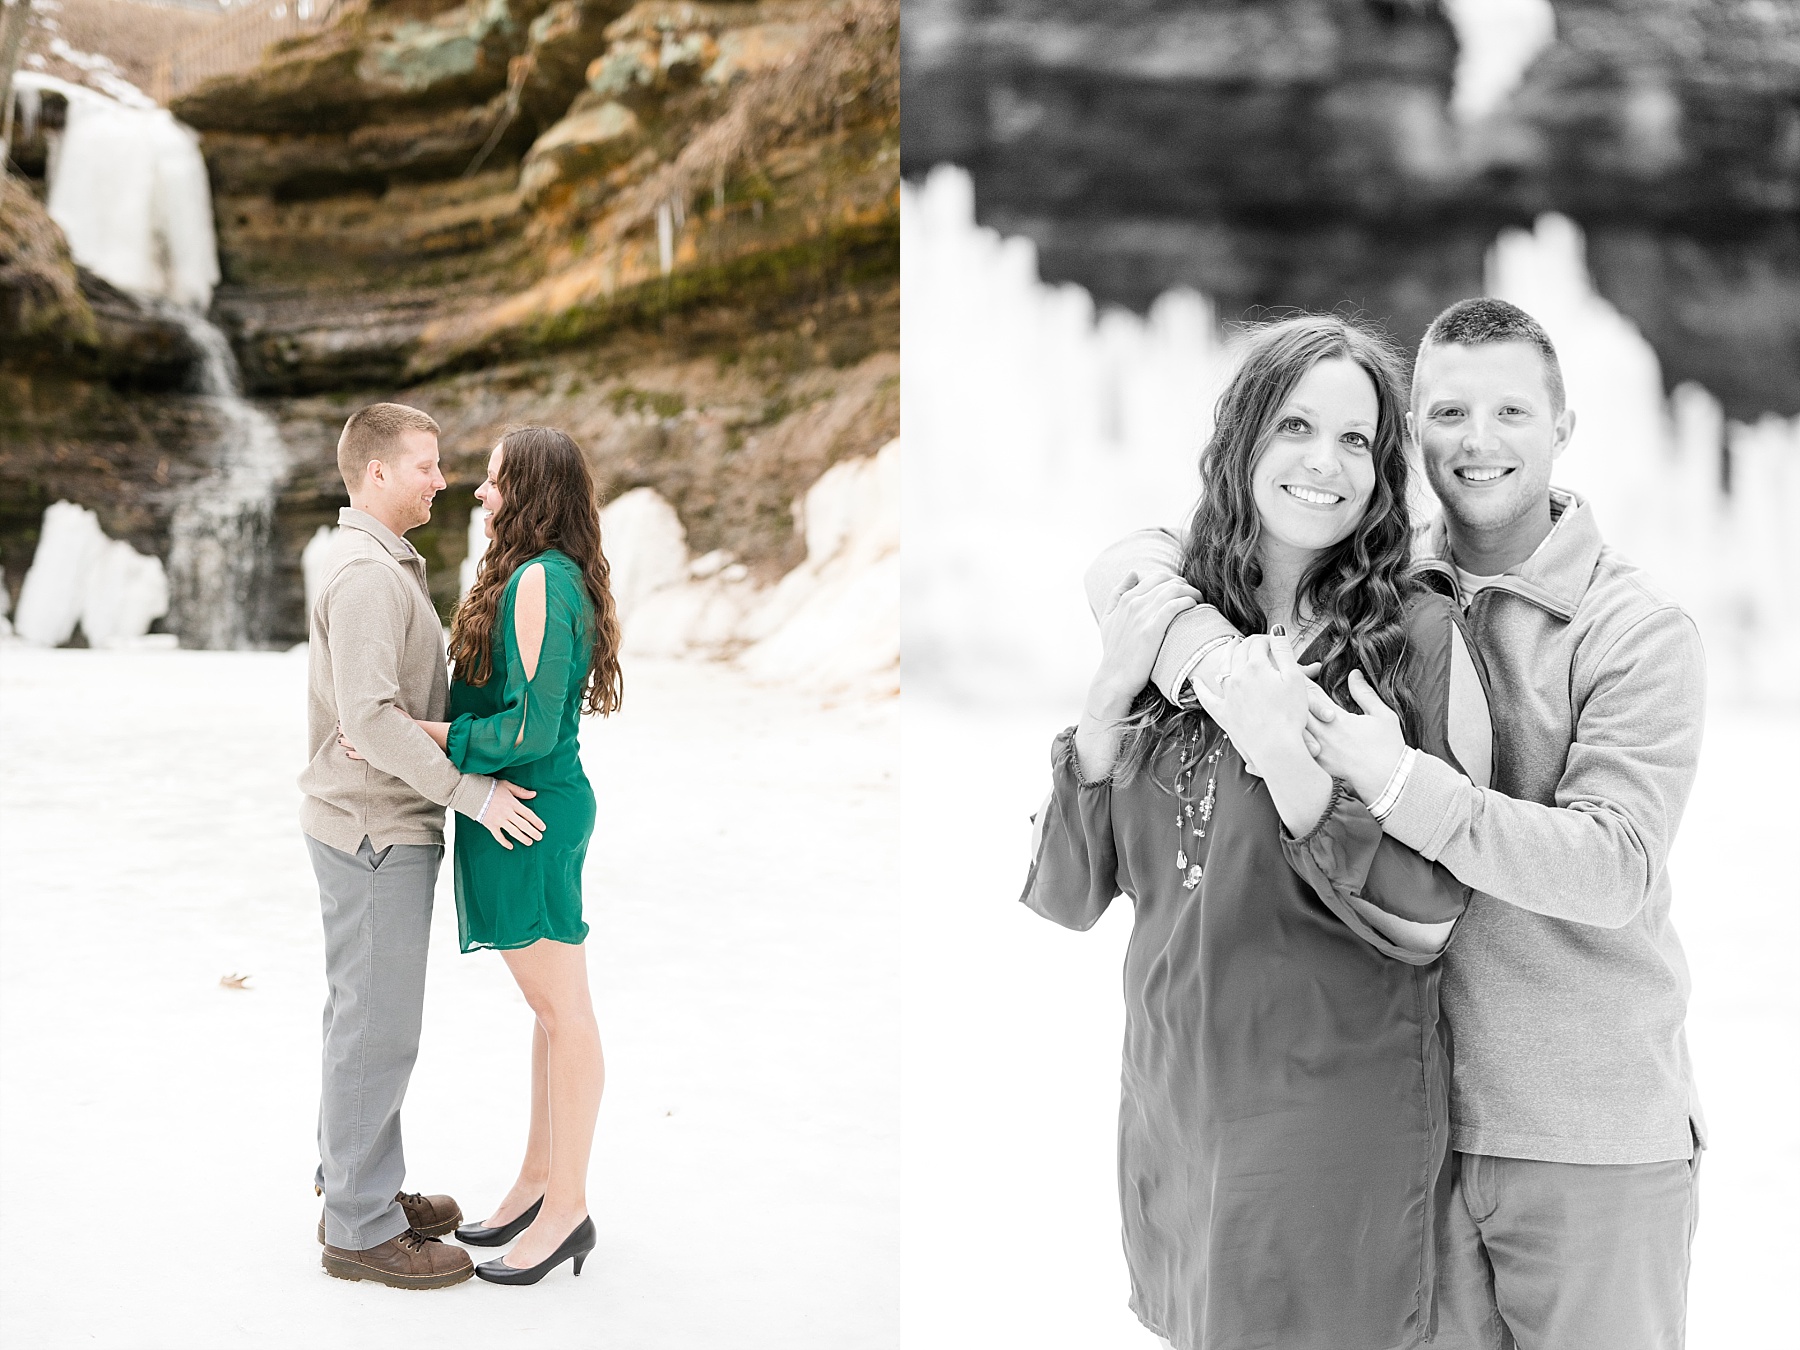 Ice hanging from the rock formations at Devils Punchbowl in Menomonie made for a great setting for Marie & Austin's engagement photos.